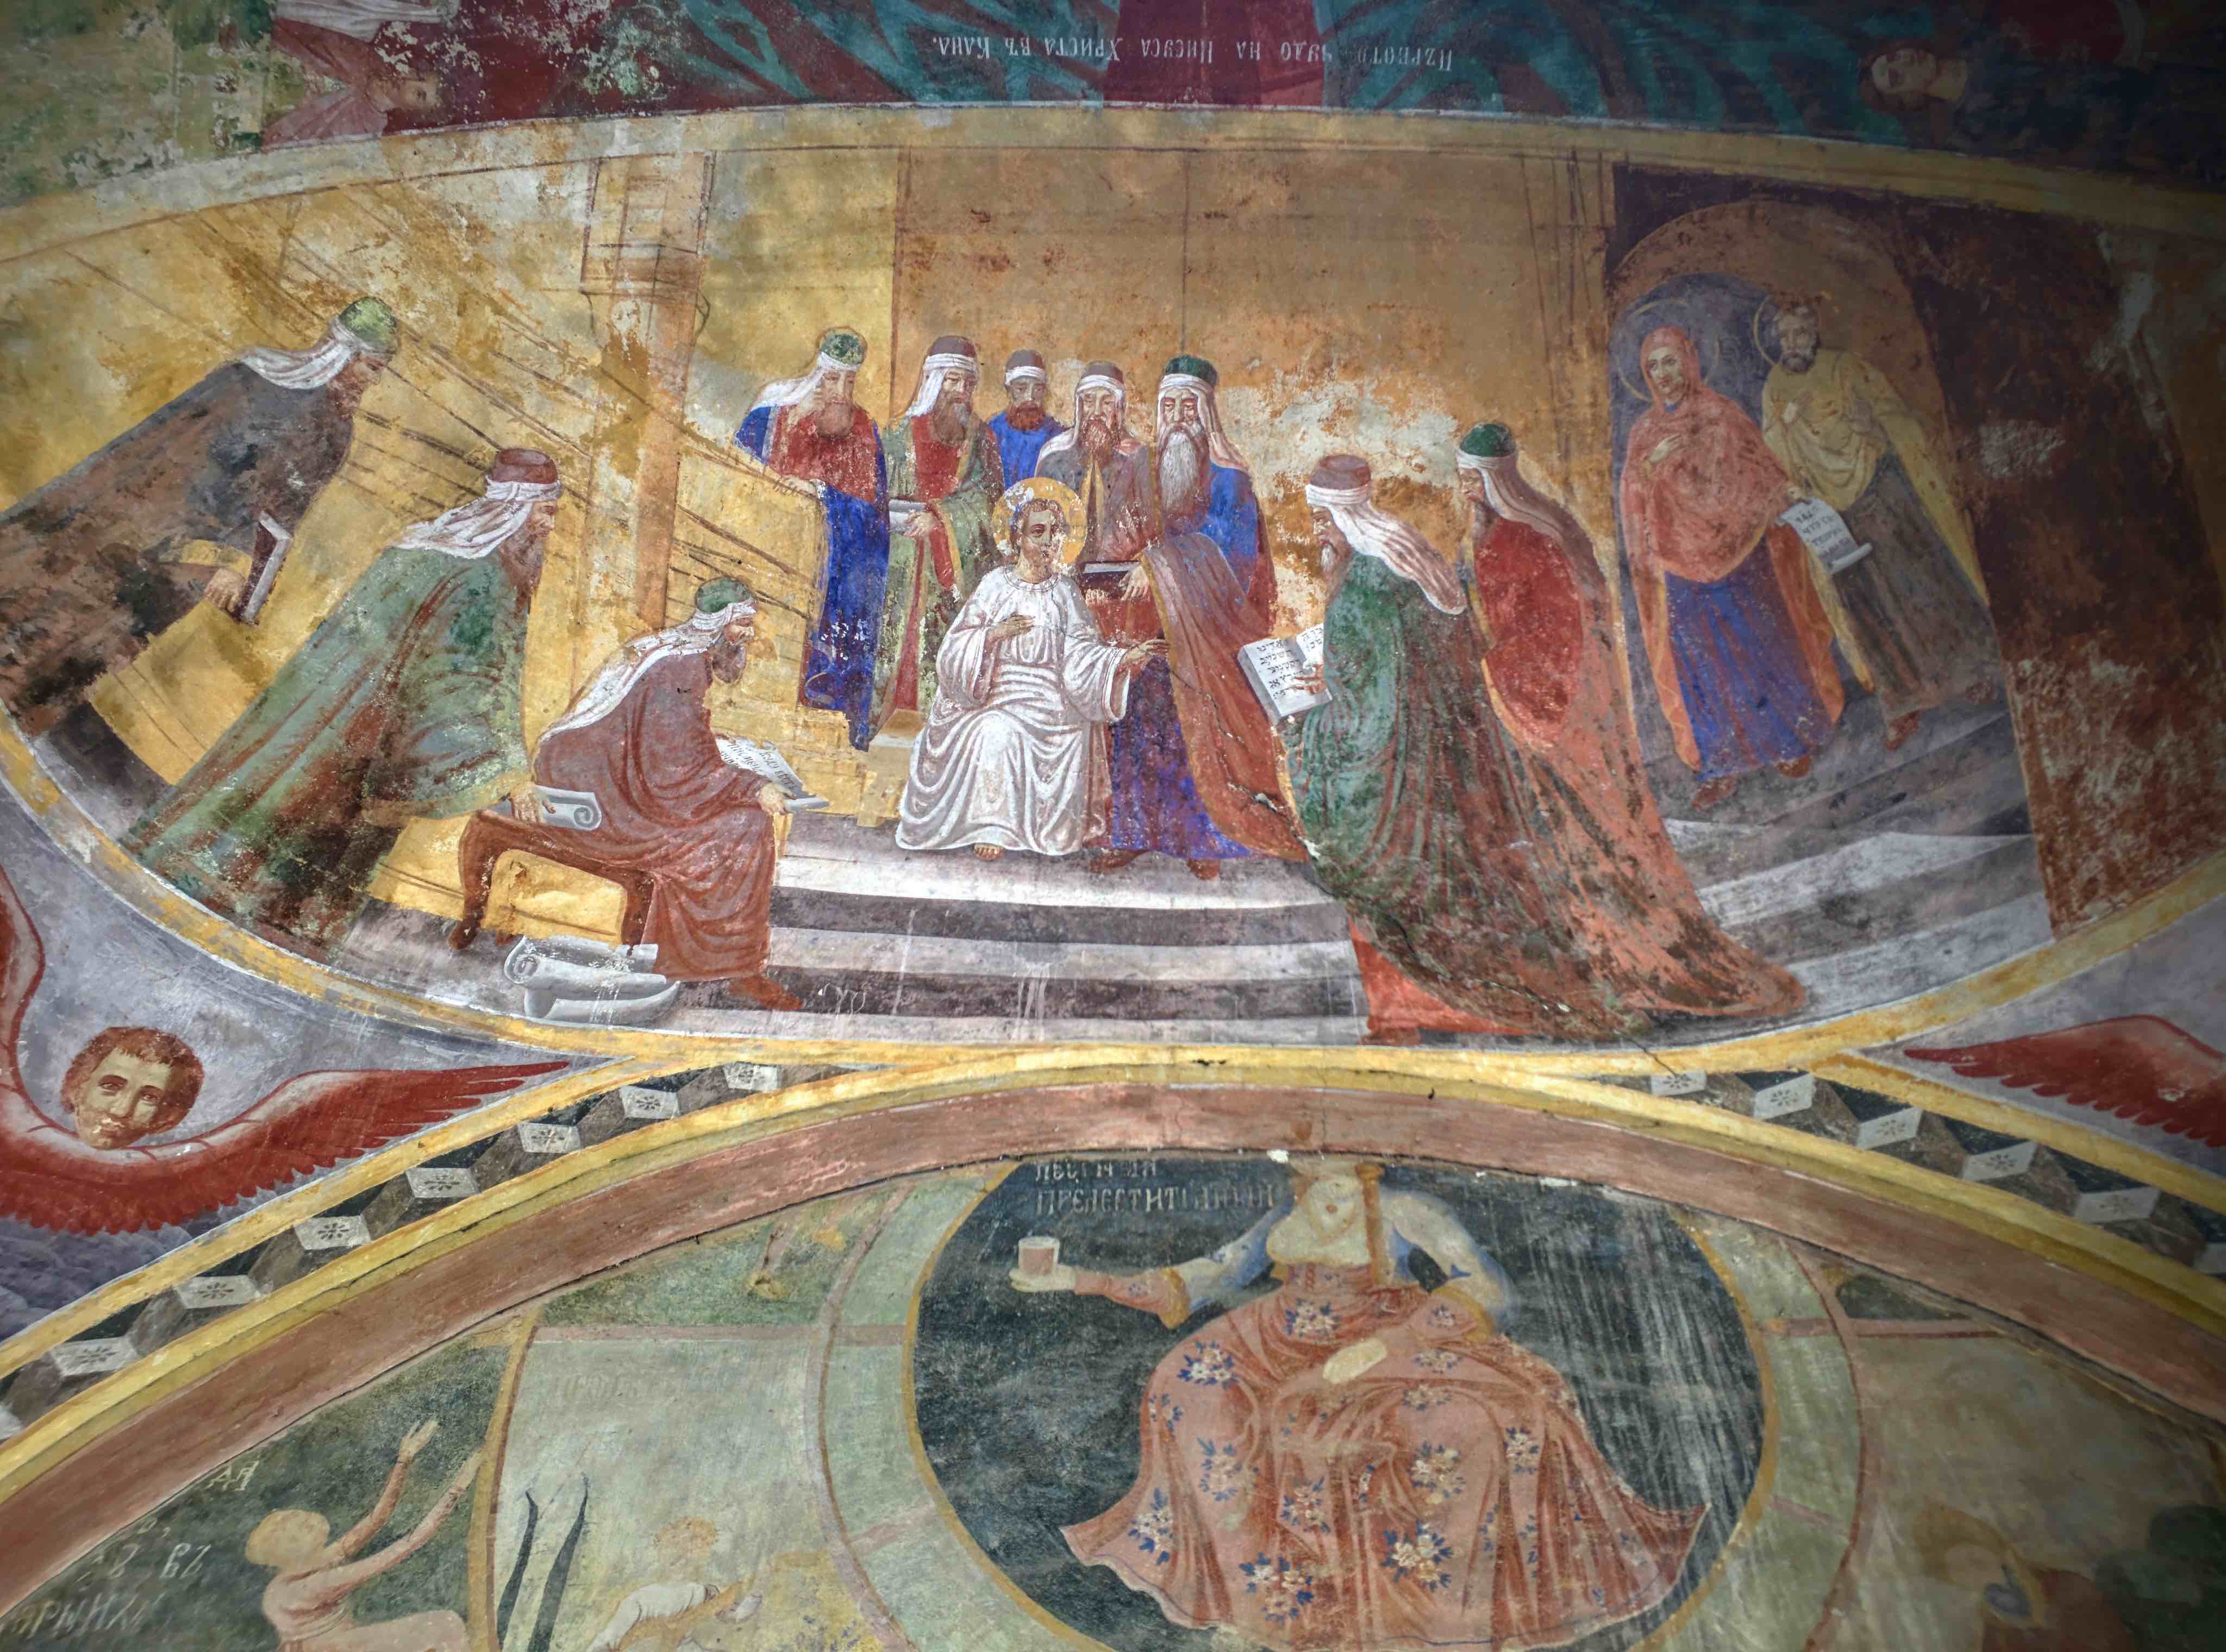 This is a continuation of fresco along the ceiling.